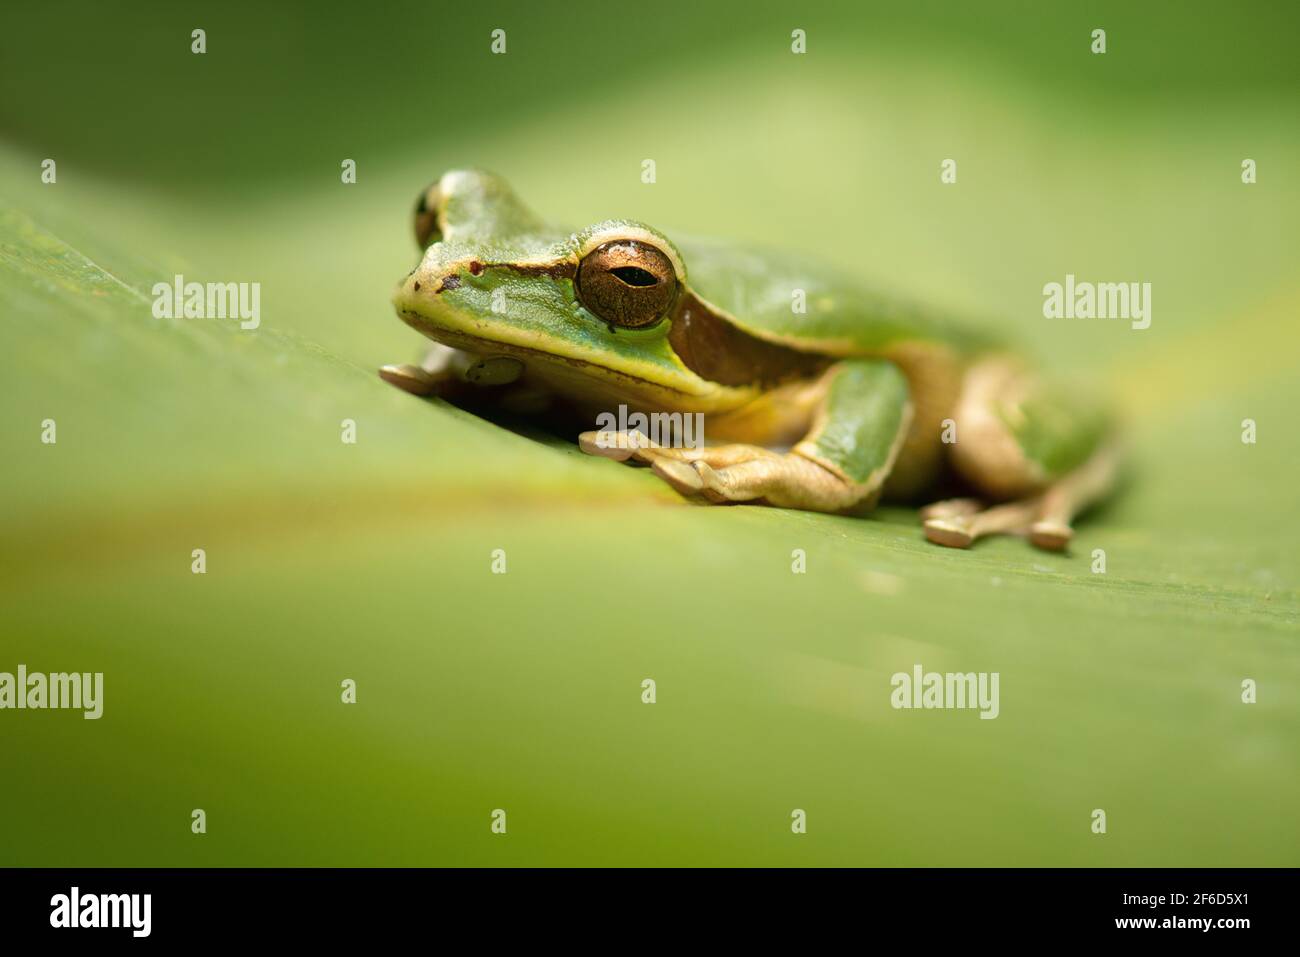 Green tree frog on a green leaf in Costa Rica Stock Photo